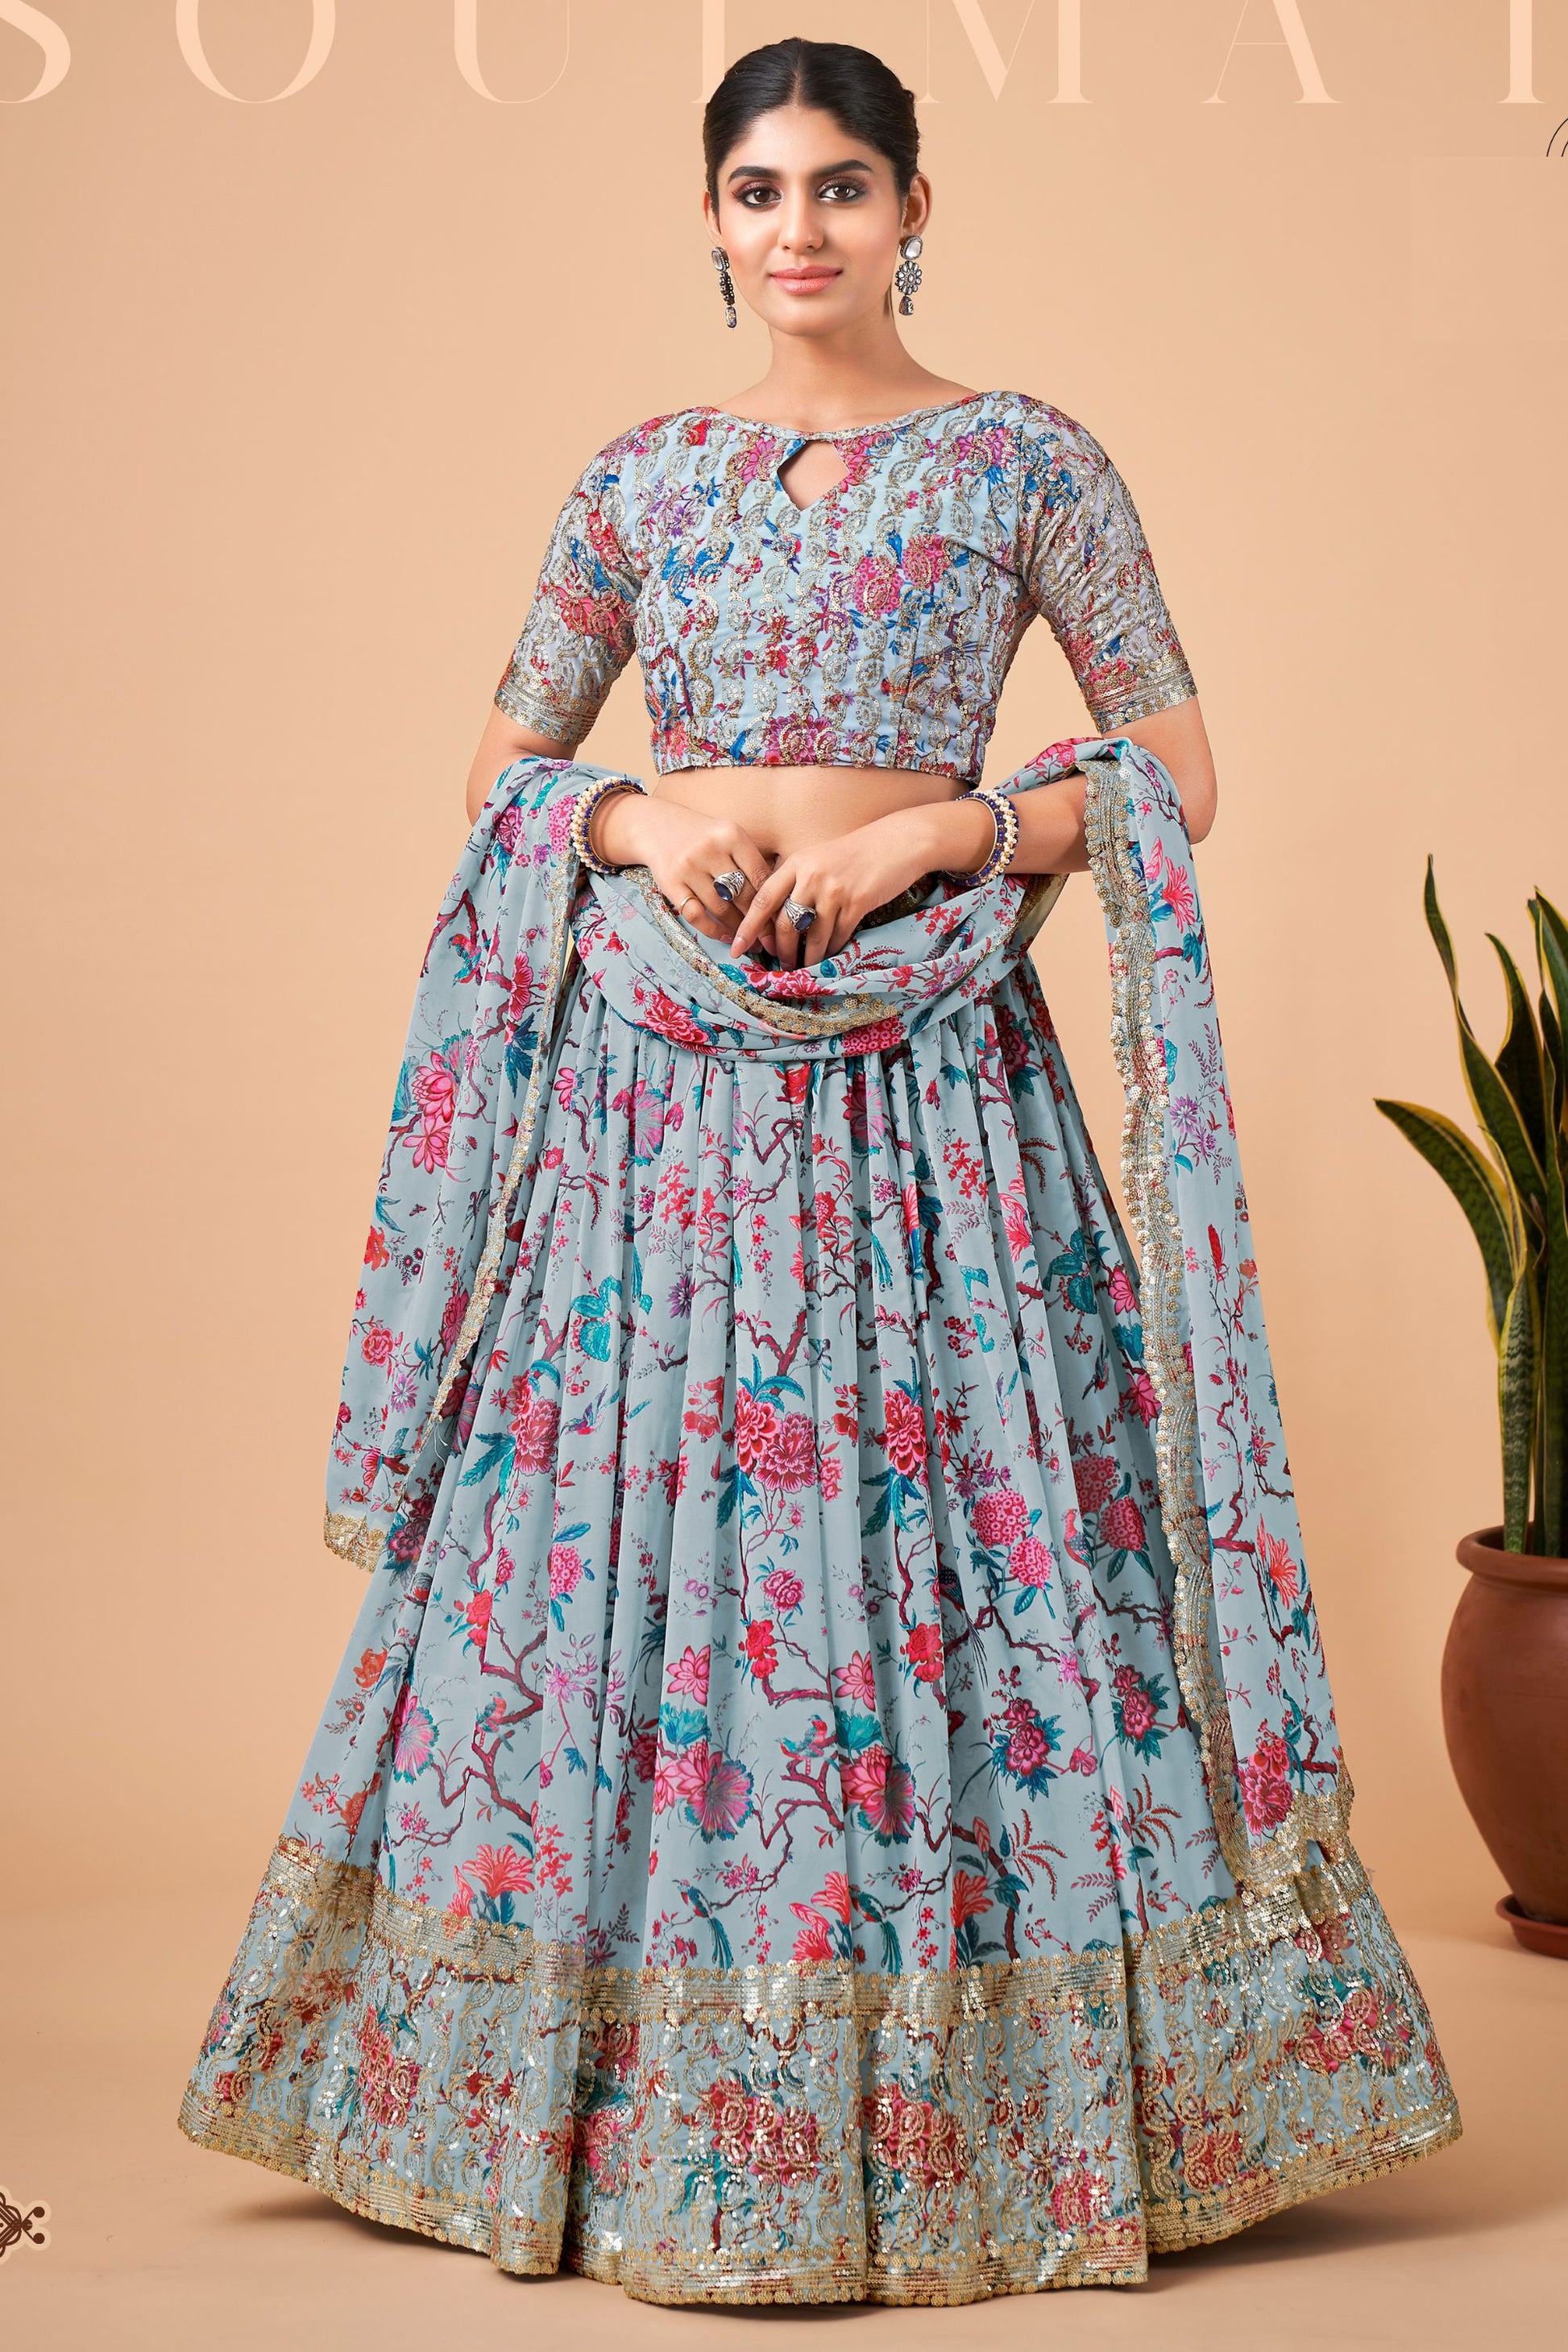 Blue Gray Pakistani Georgette Floral Printed Lehenga Choli For Indian Festivals & Weddings - Sequence Embroidery Work, Zari Work